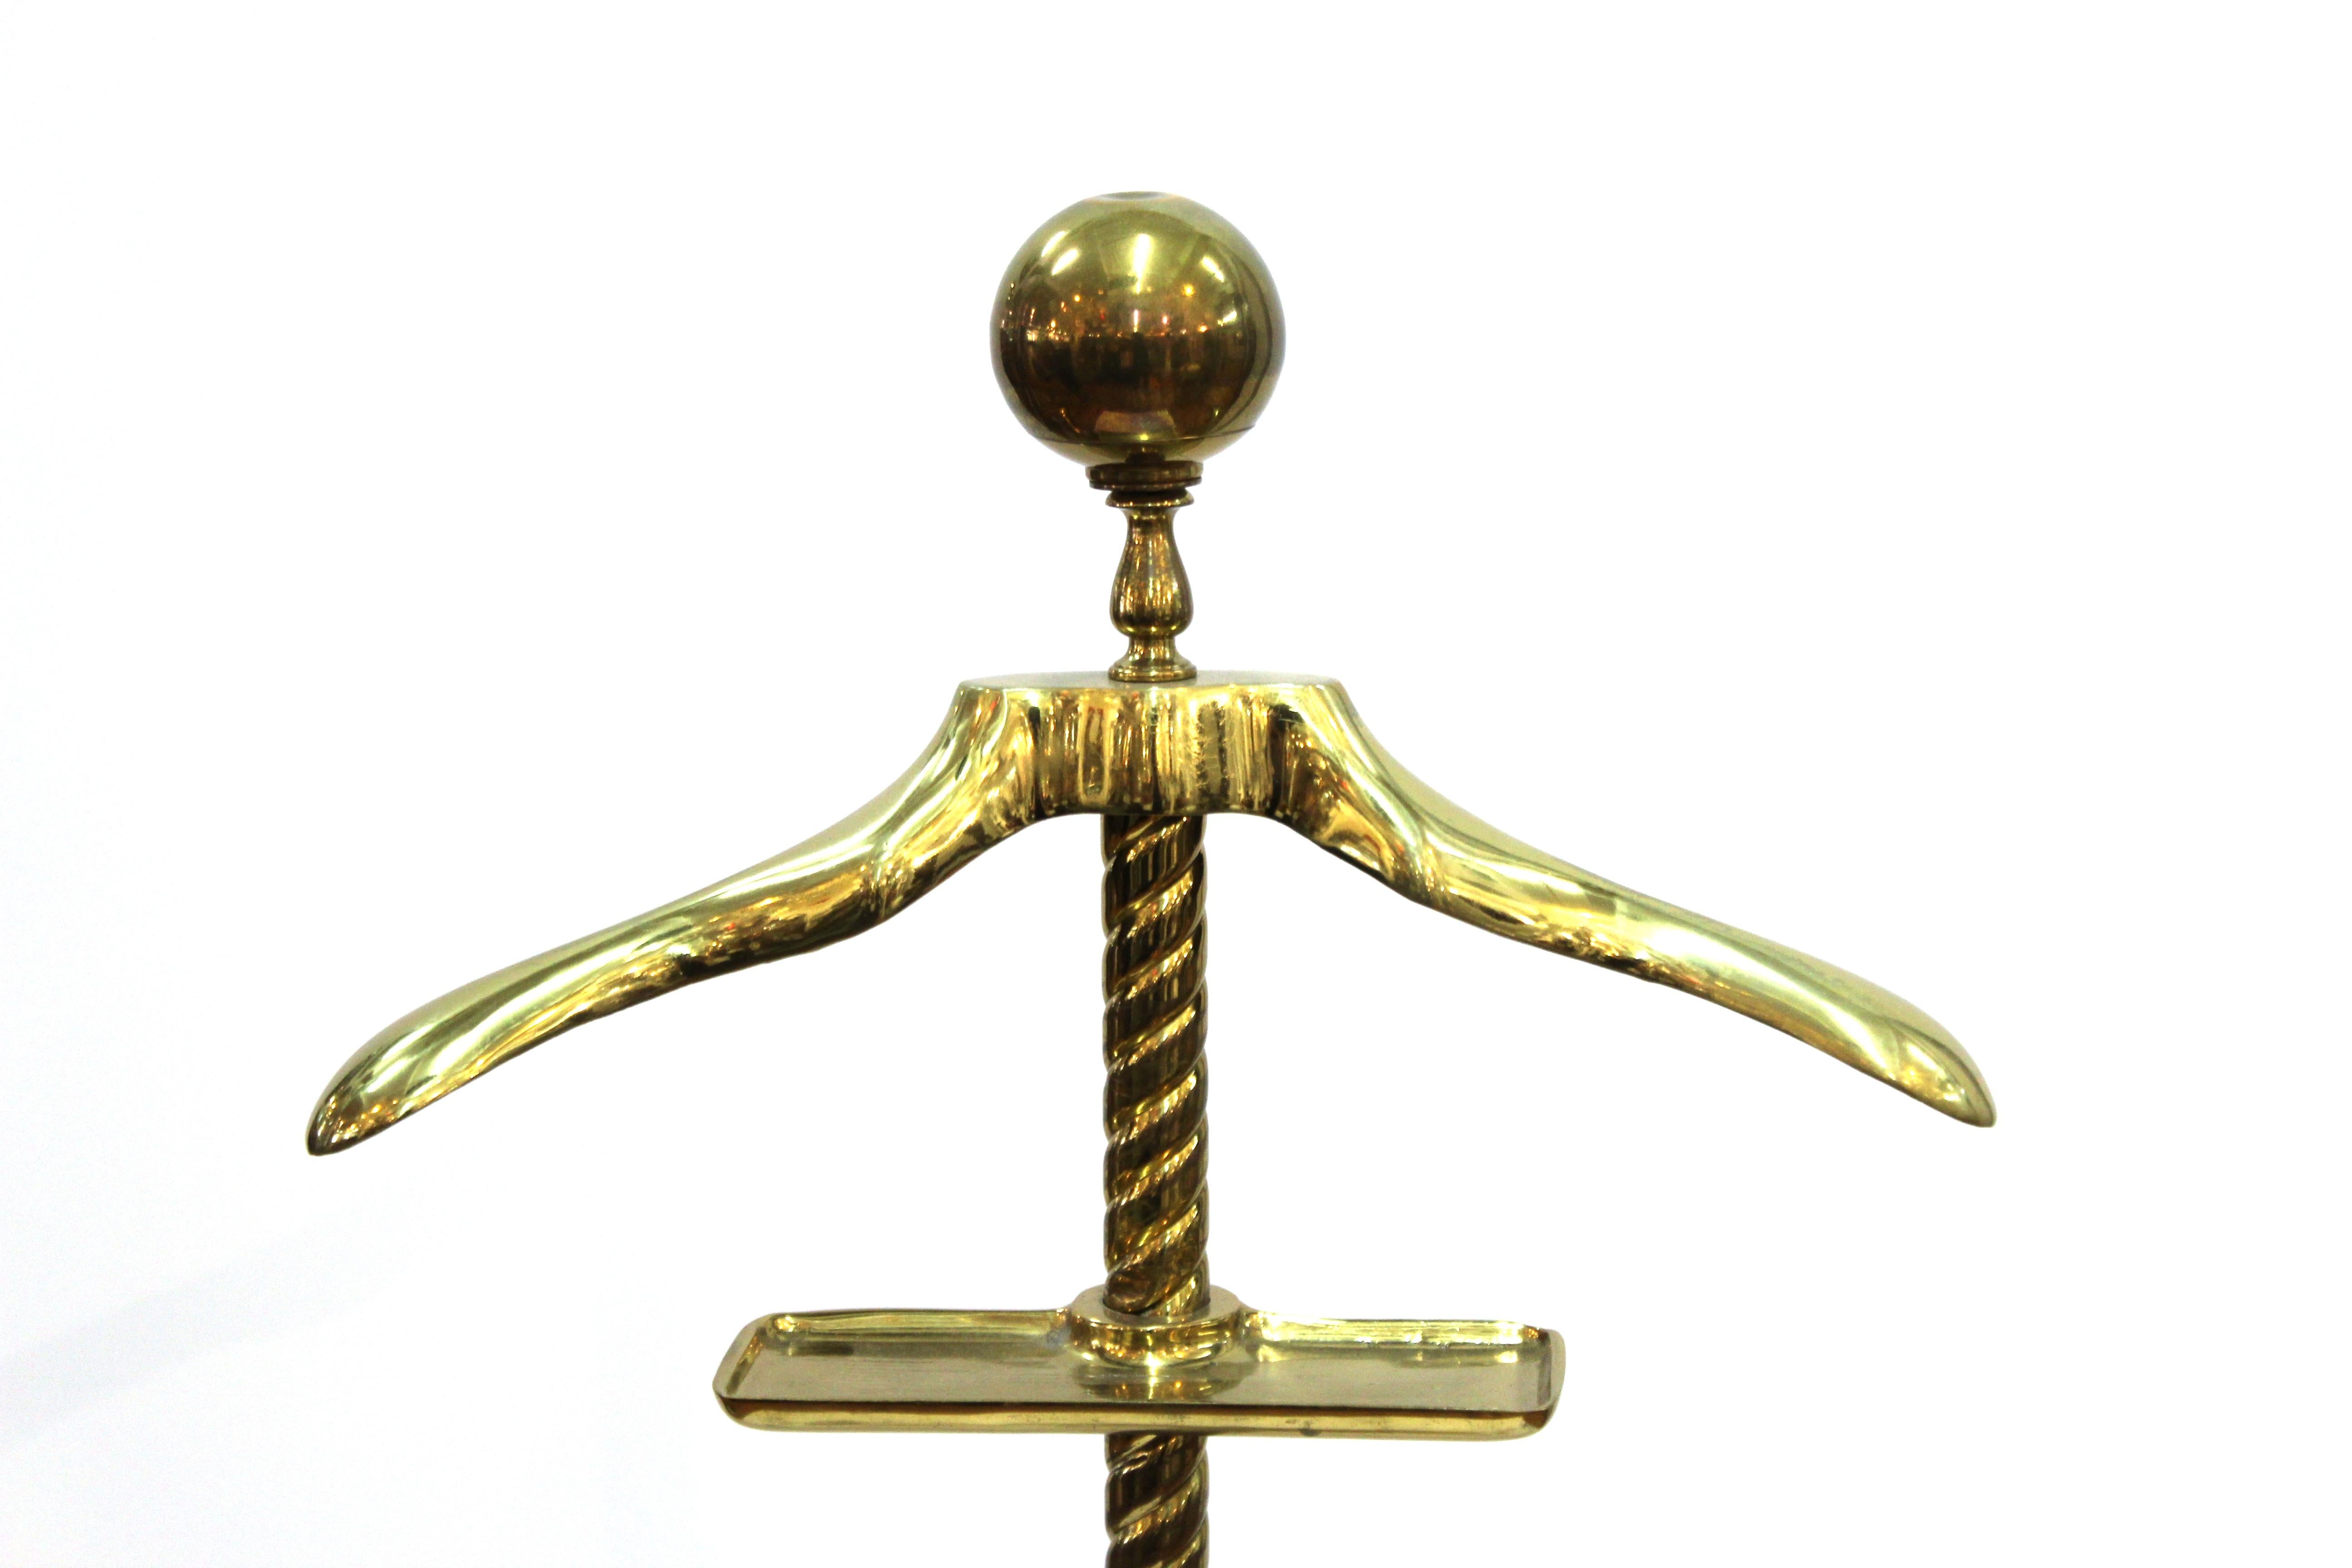 Mid-Century Modern neoclassical influence brass valet with twisted column and large ball finial. In great vintage condition with age-appropriate wear and use and a minor dent on the top of the brass ball.